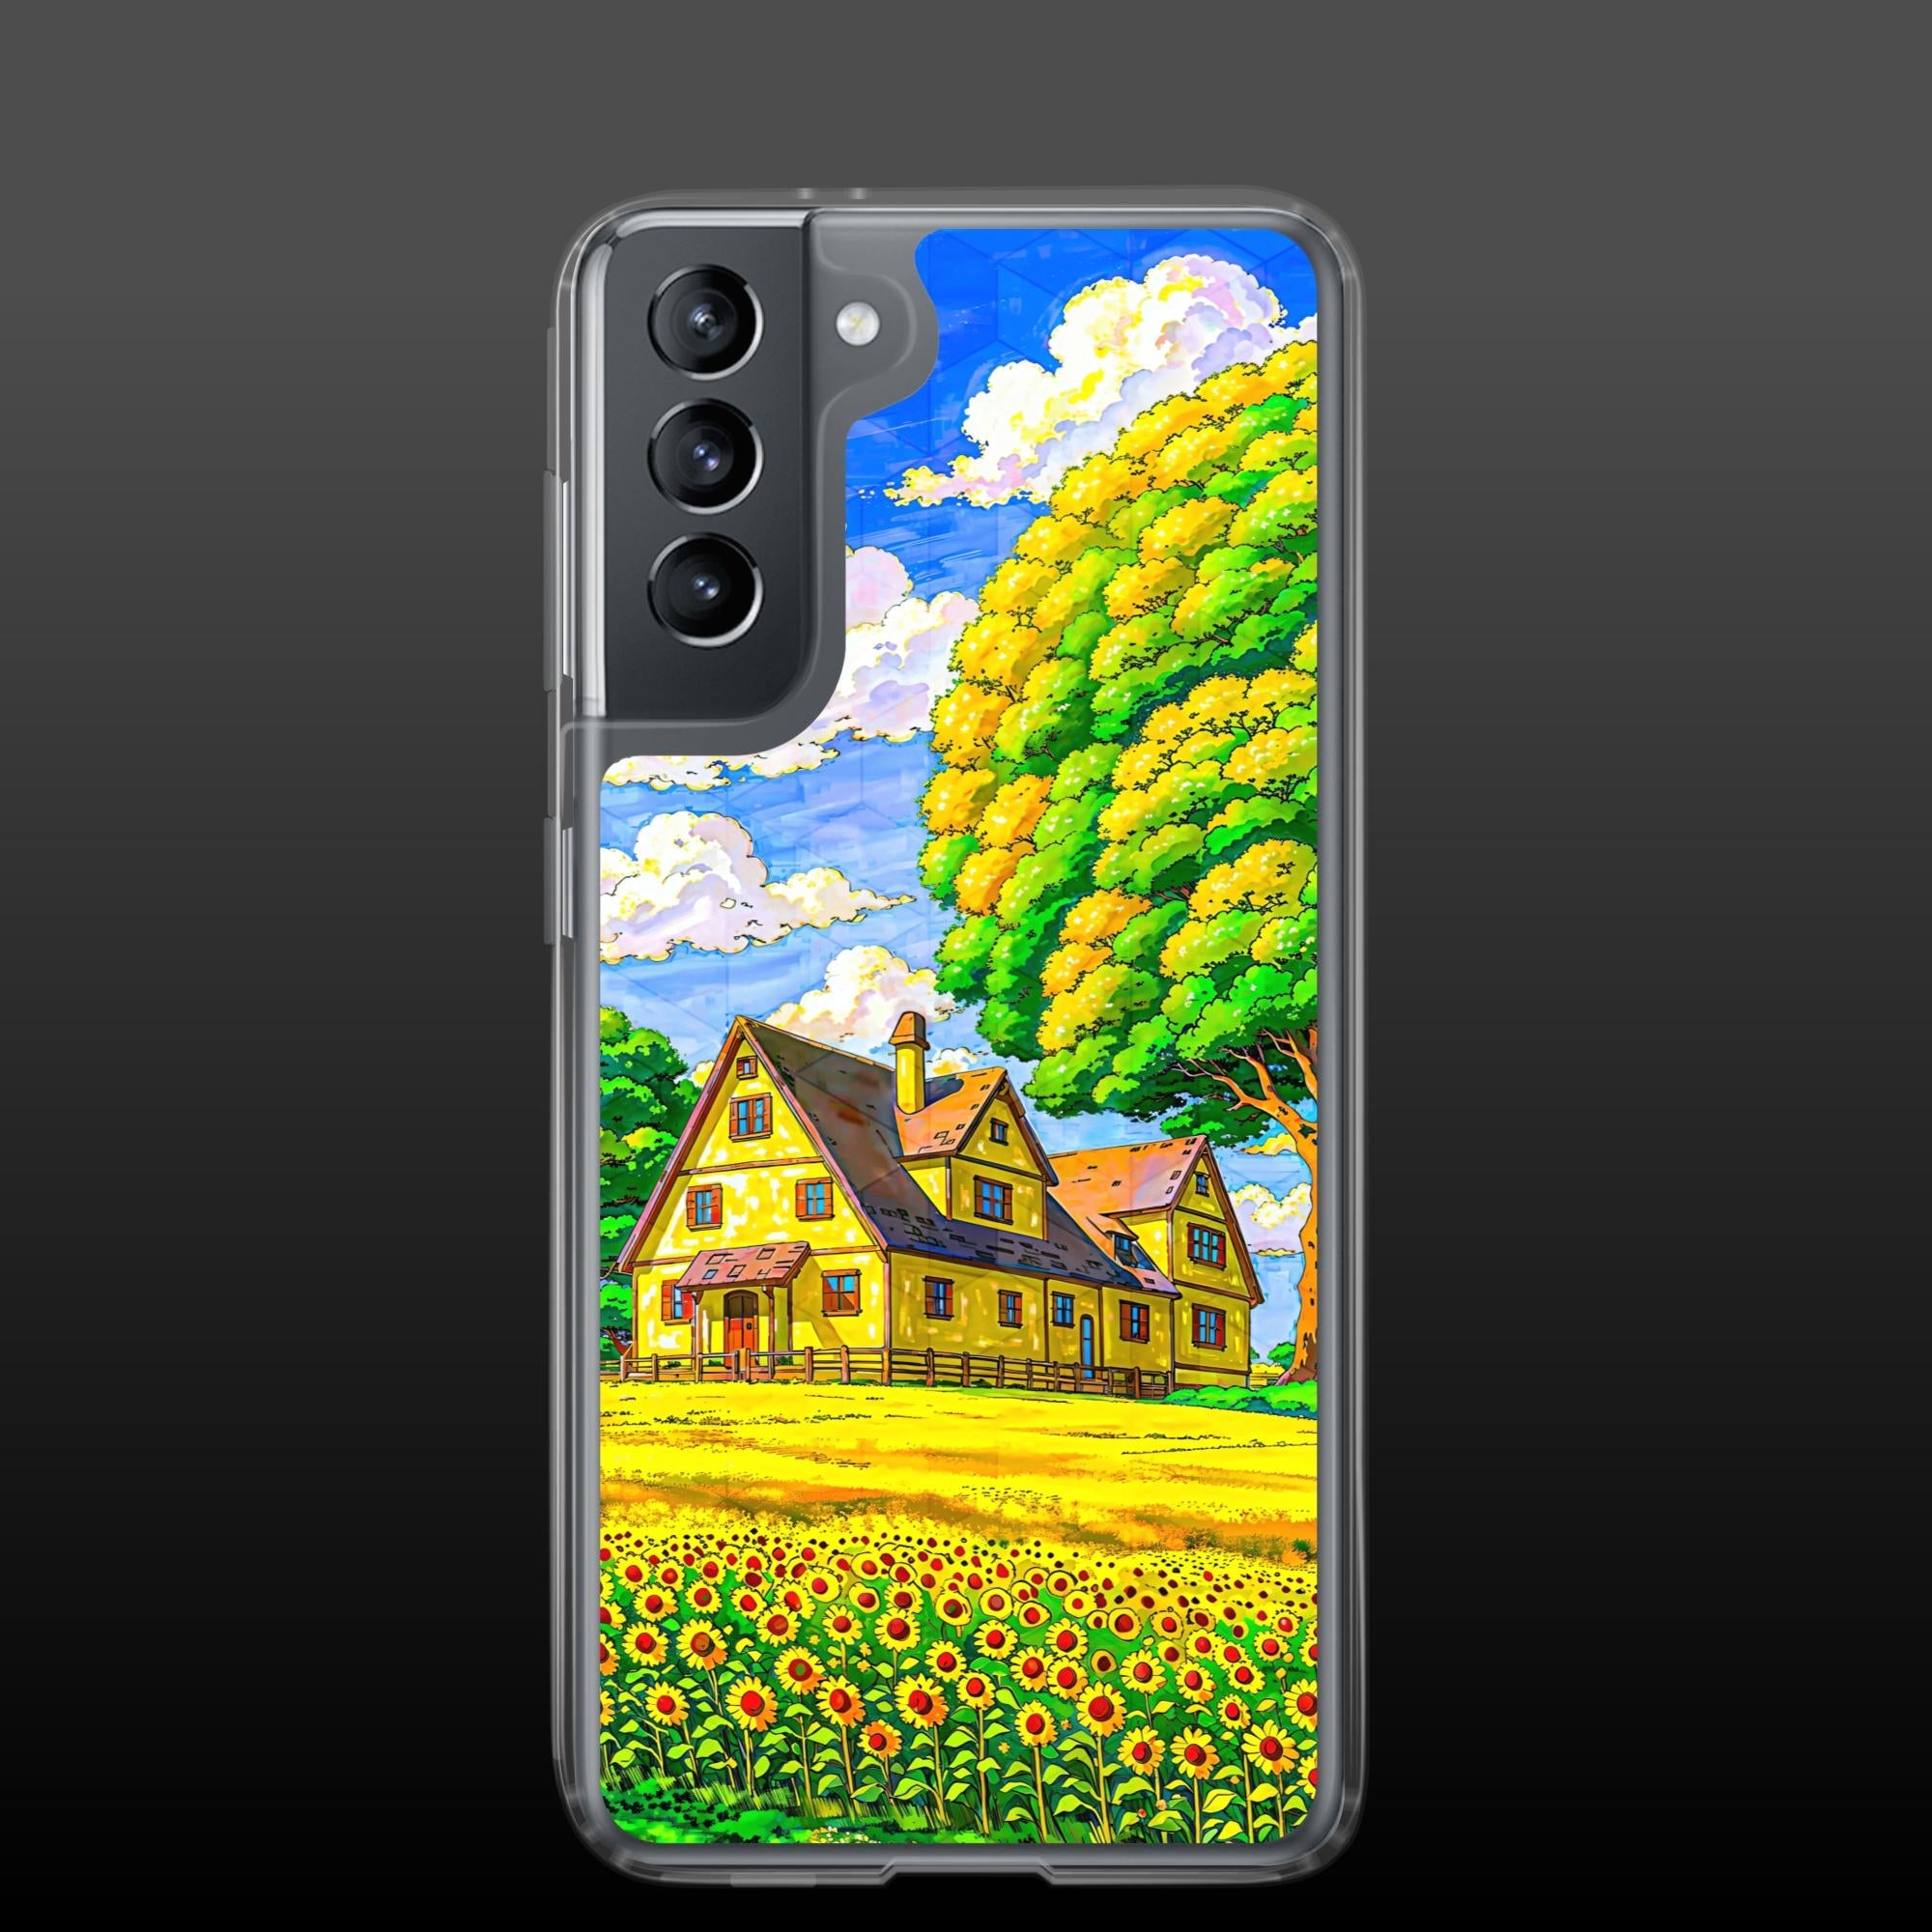 "Summertime reality" clear samsung case - Clear samsung case - Ever colorful